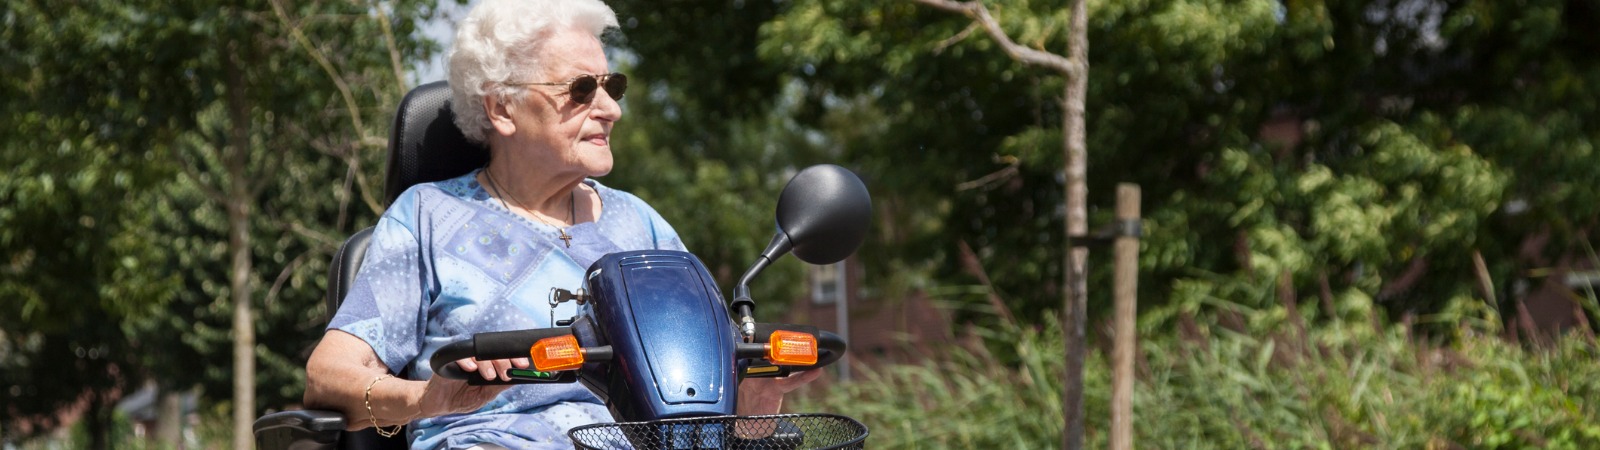 Older woman riding scooter near trees